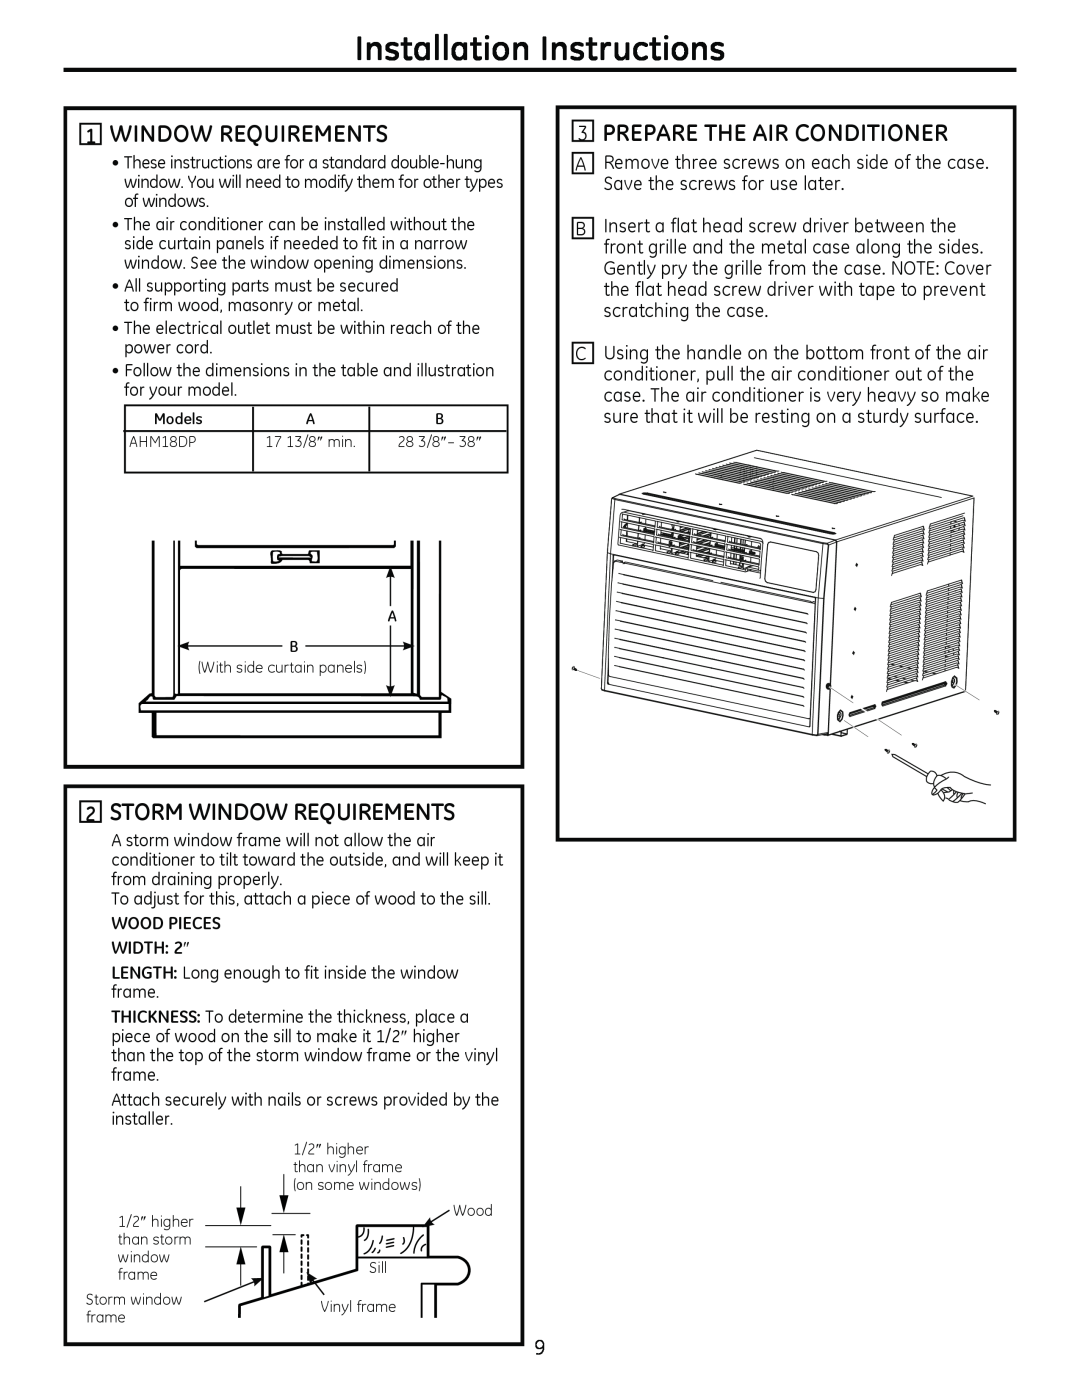 GE AHM18 1WINDOW REQUIREMENTS, 2STORM WINDOW REQUIREMENTS, 3PREPARE THE AIR CONDITIONER, Installation Instructions 